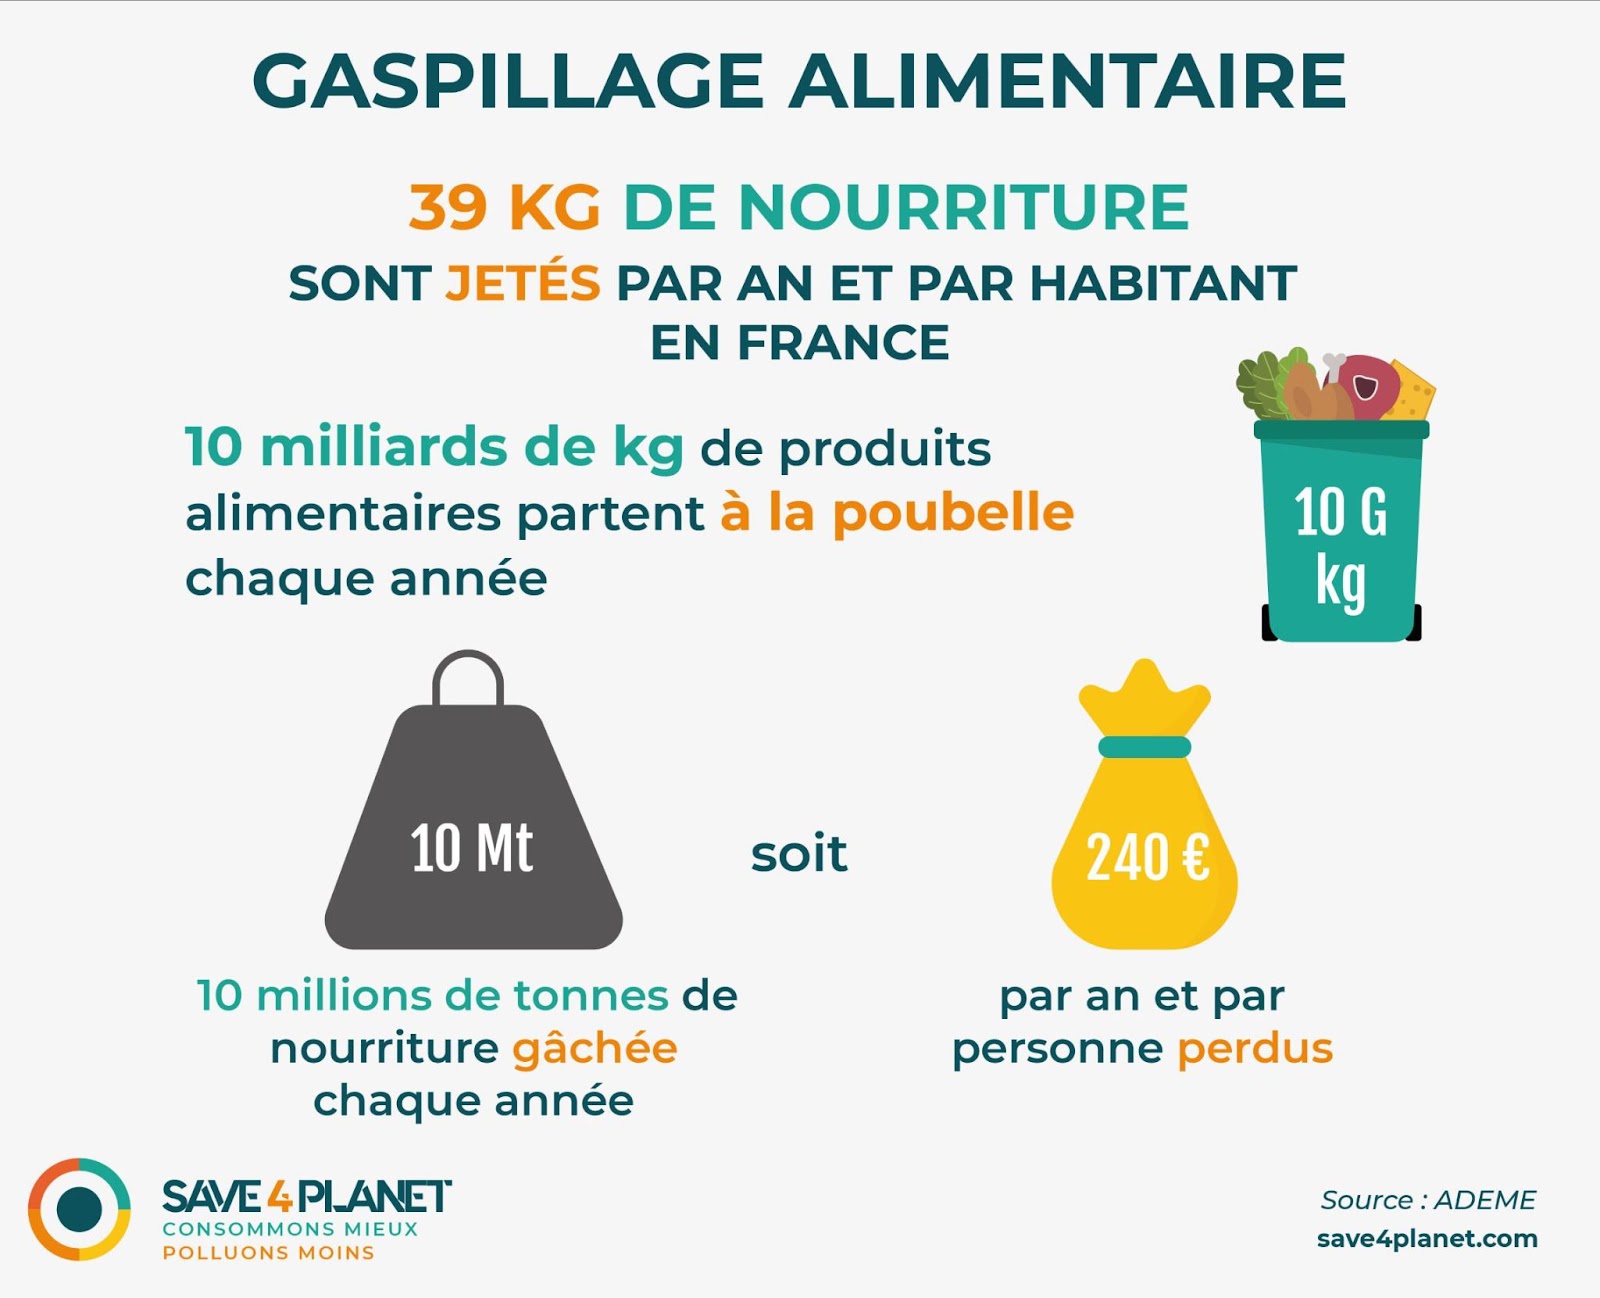 image gaspillage alimentaire france